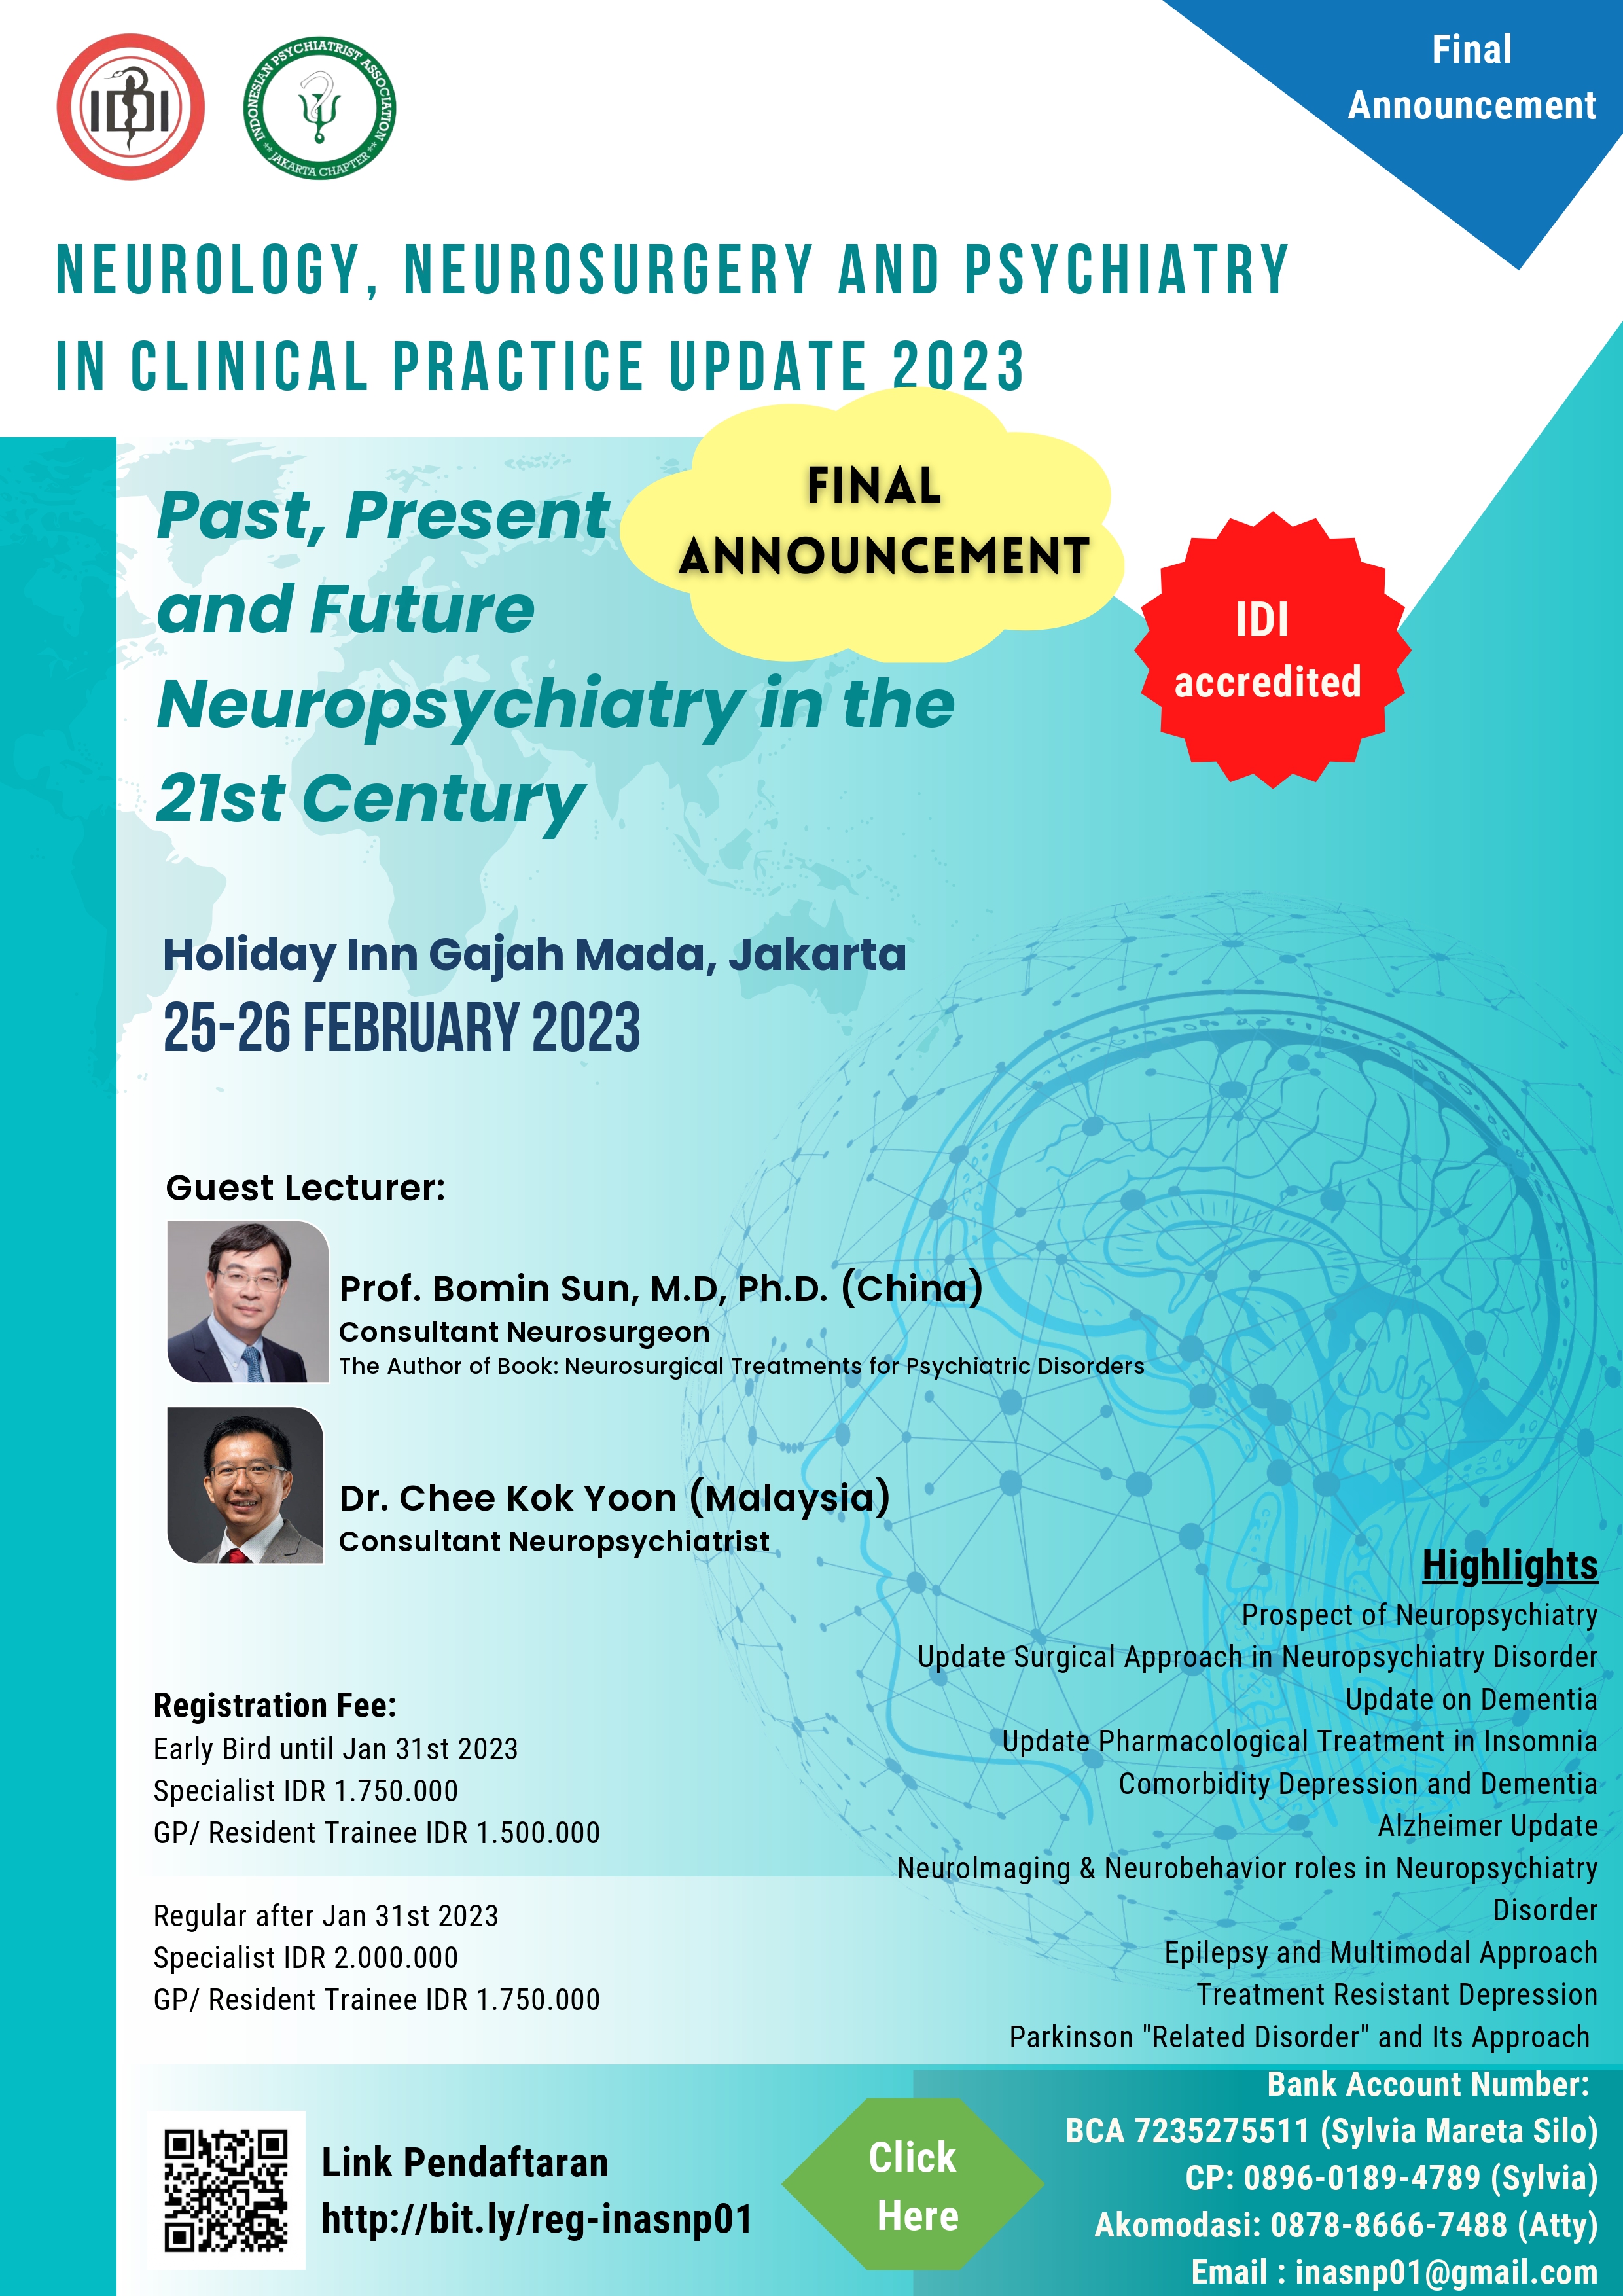 Neurology, Neurosurgery and Psychiatry in Clinical Practice Update 2023